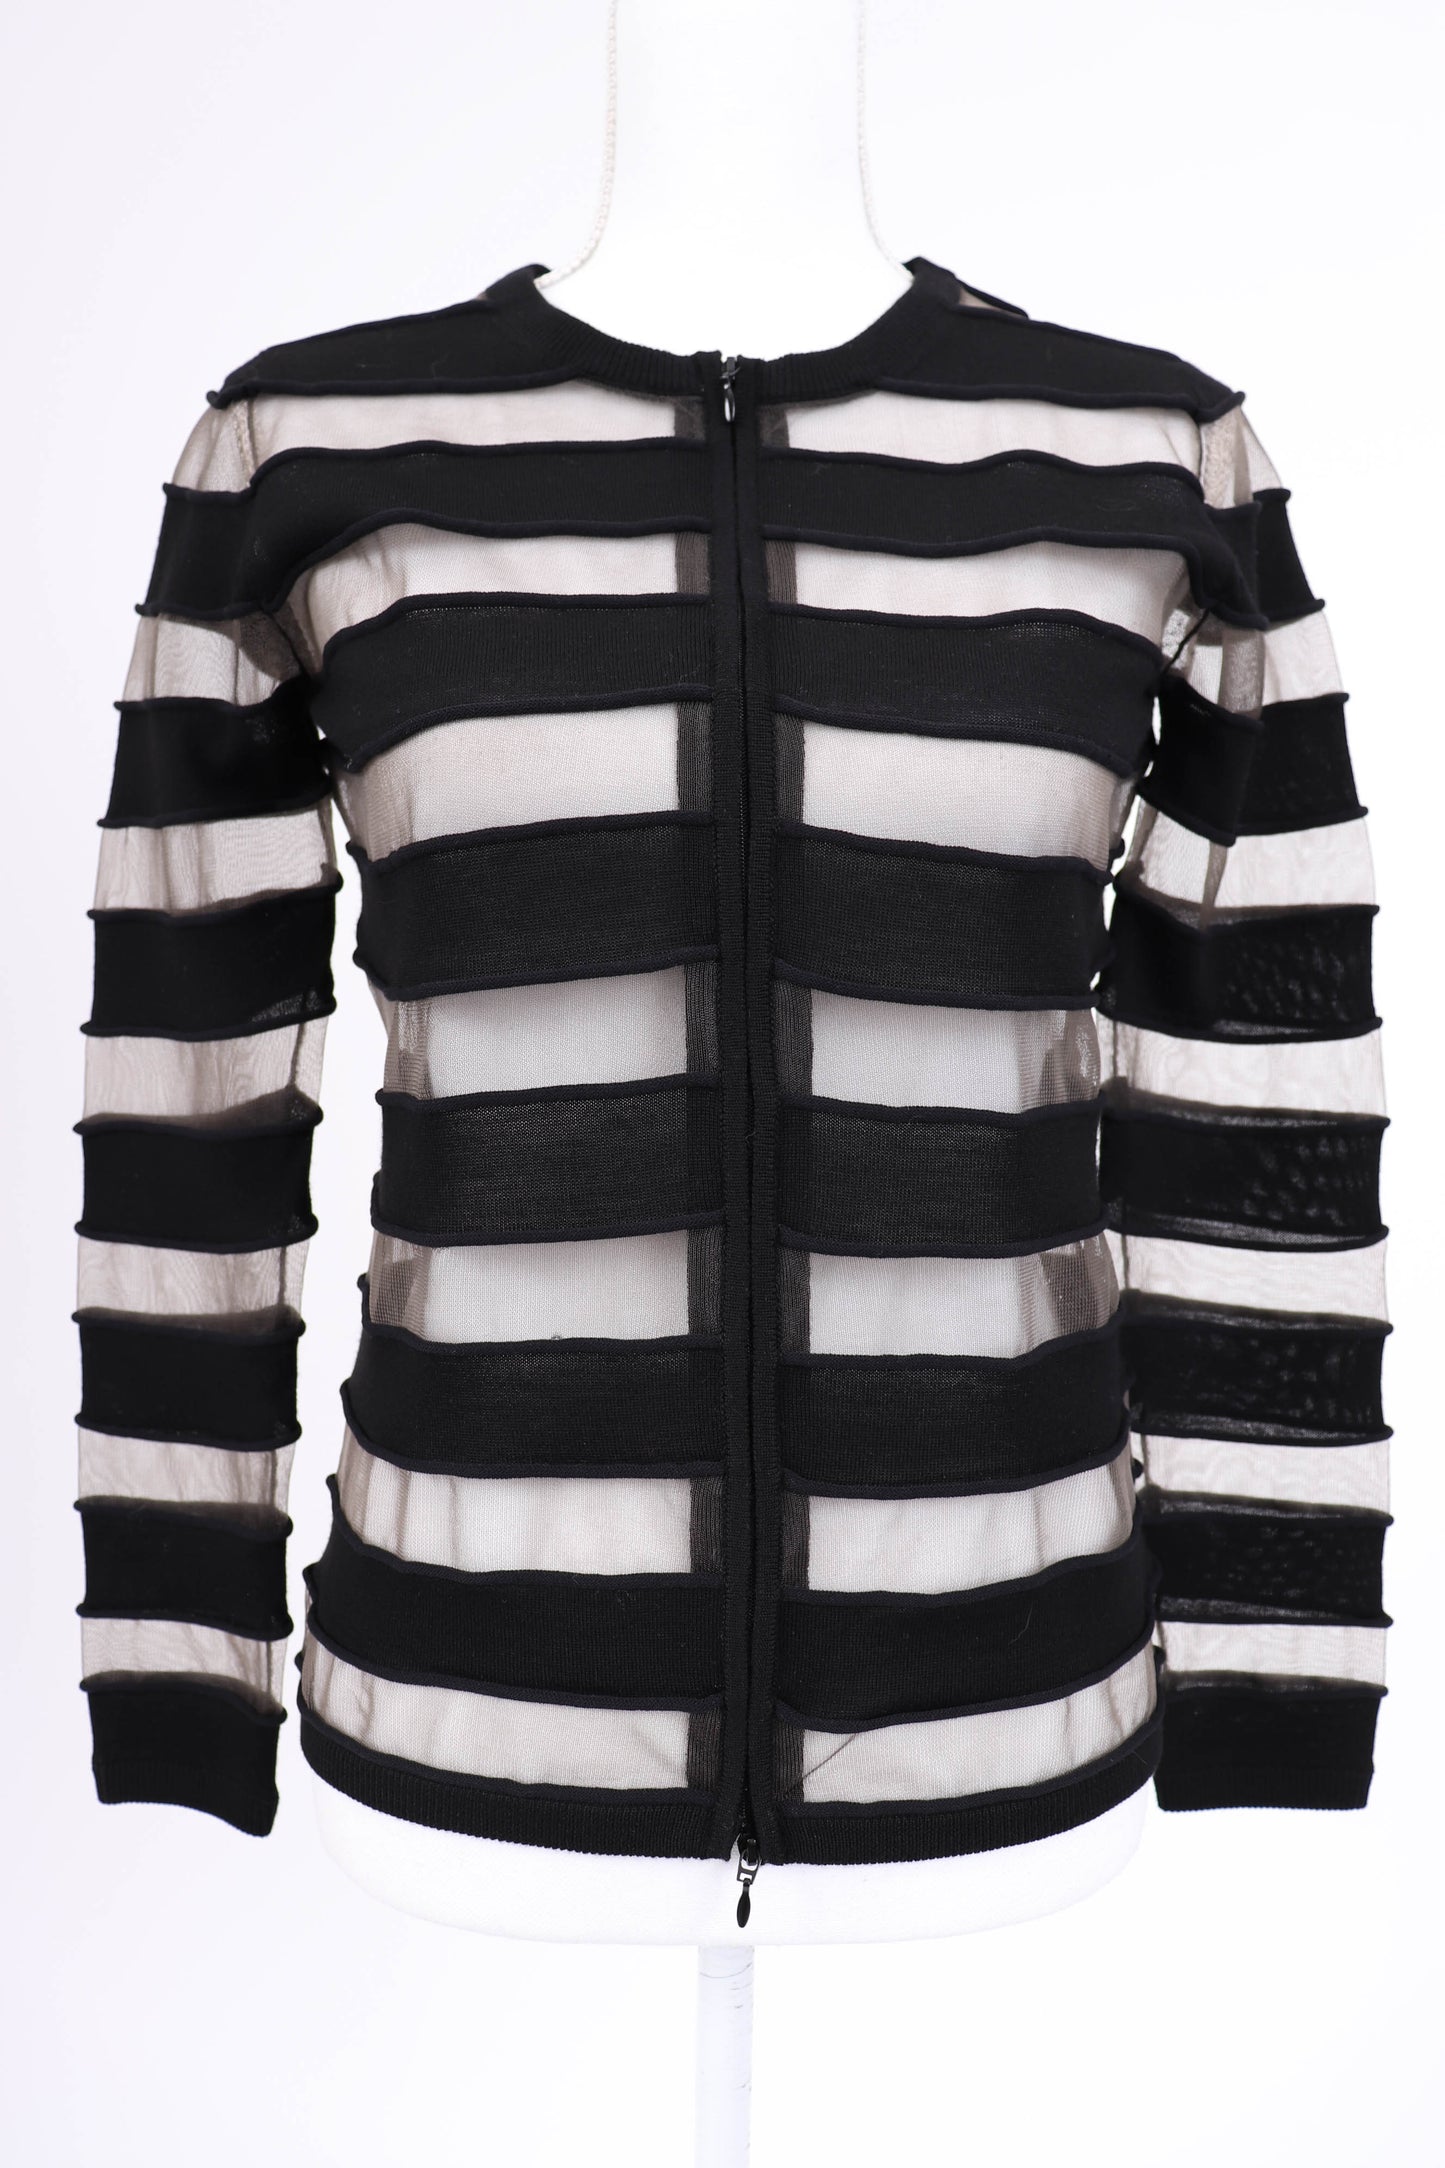 00's Black and Sheer Striped Cardigan XS/S